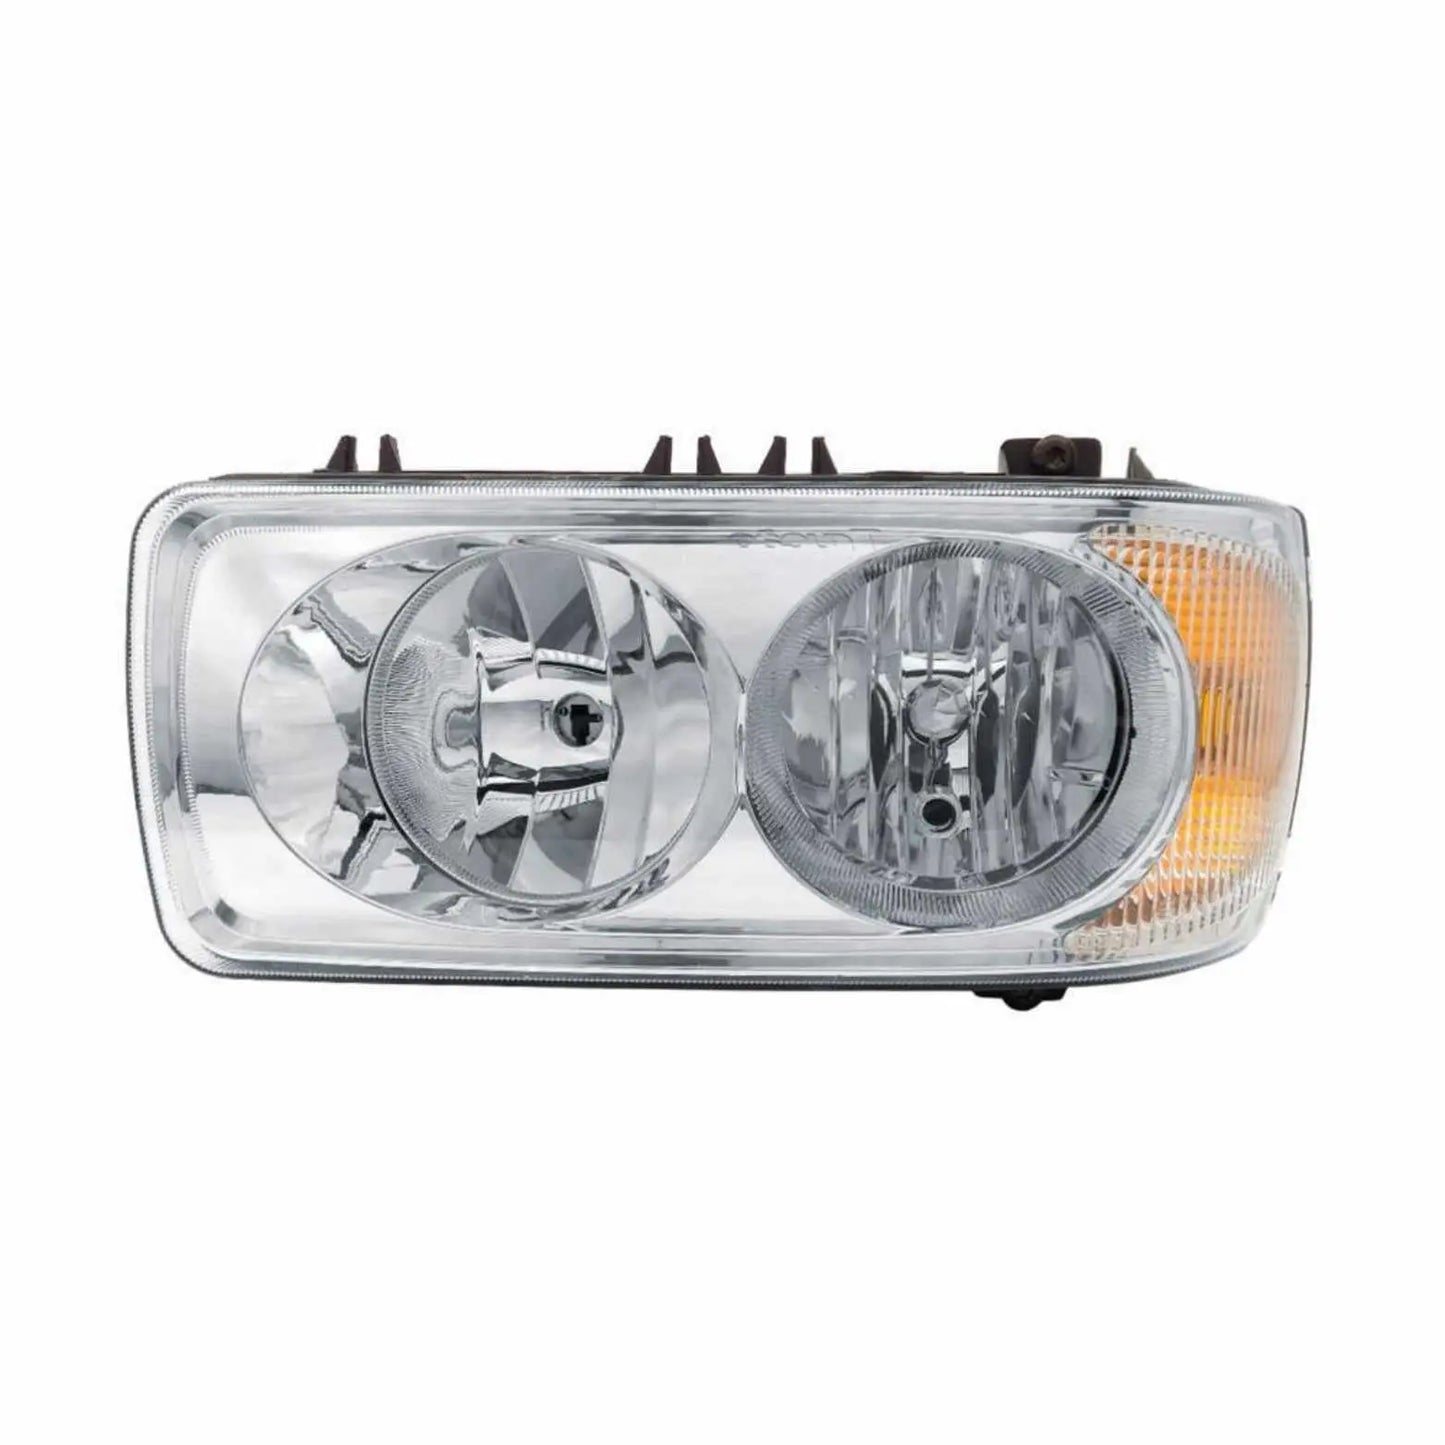 FANCHANTS 1743688 1699305 1641746 HEAD LAMP Manual, RHD, With E Mark, Without Bulb, Right FOR DAF 75/85 CF, CF 65 /IV, CF 75 /IV, CF 85 /IV, XF 95/105 FANCHANTS Aftermarket Auto Parts